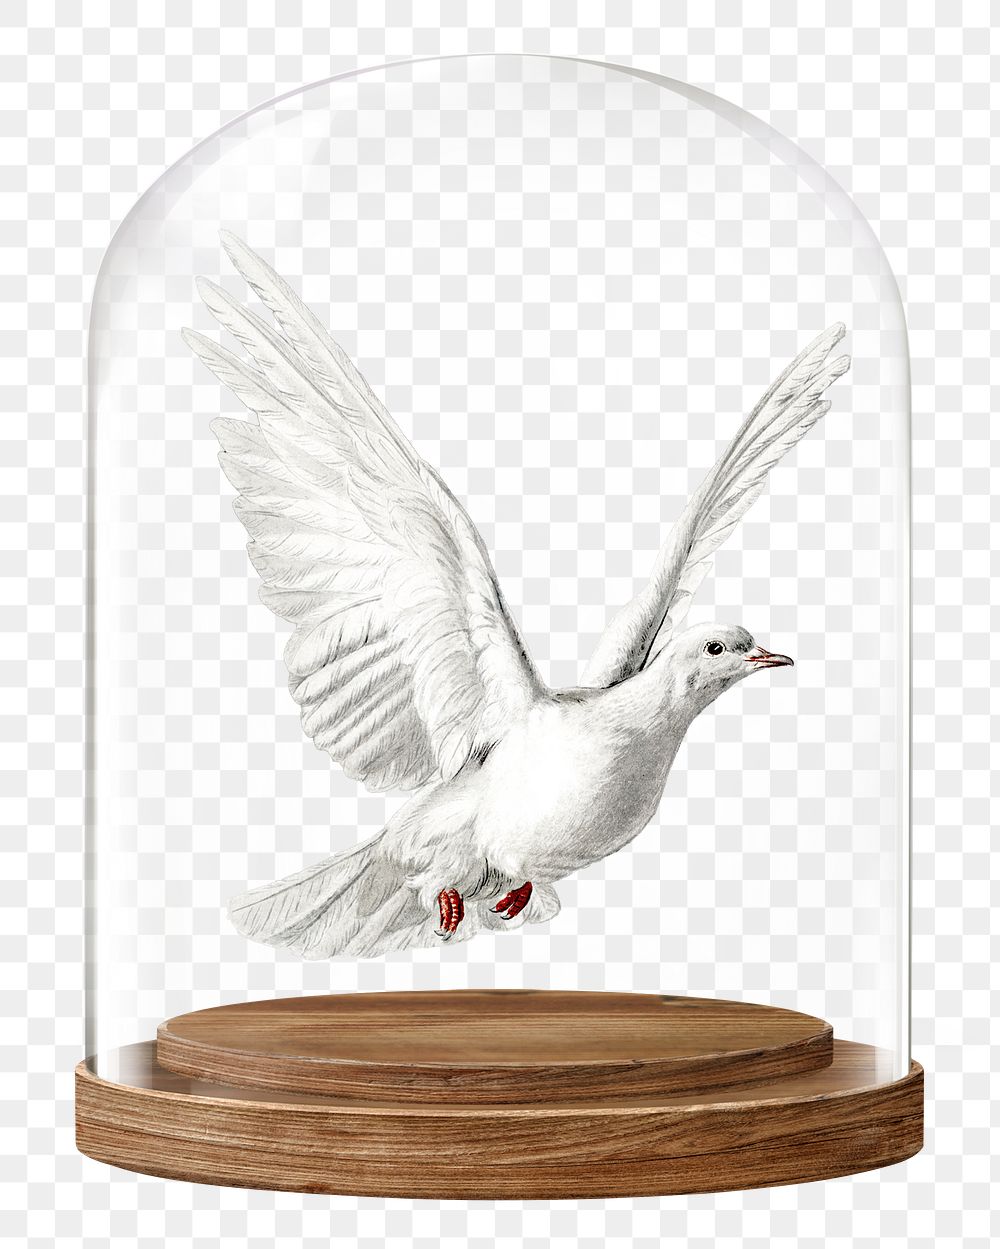 Flying dove png glass dome sticker, bird concept art, transparent background